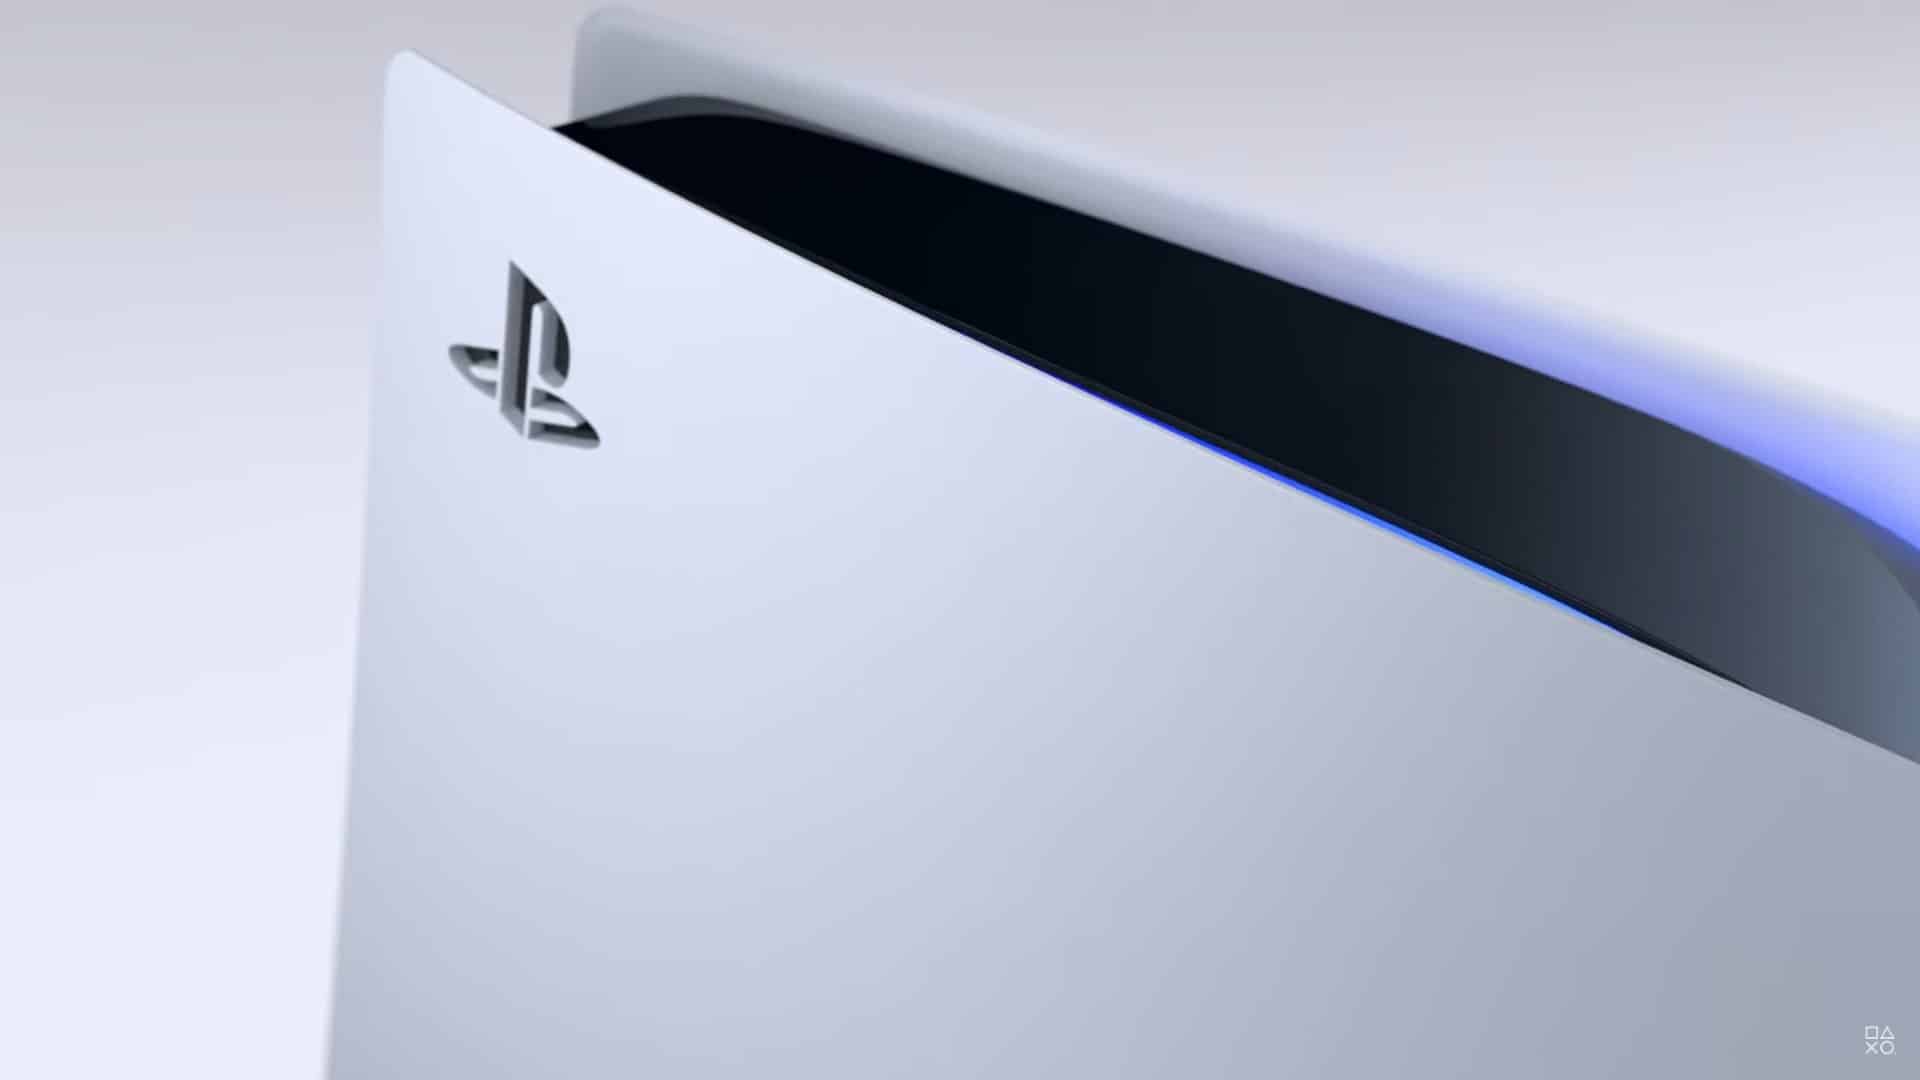 Sony to Raise PlayStation 5 Prices Across Europe, Asia and More